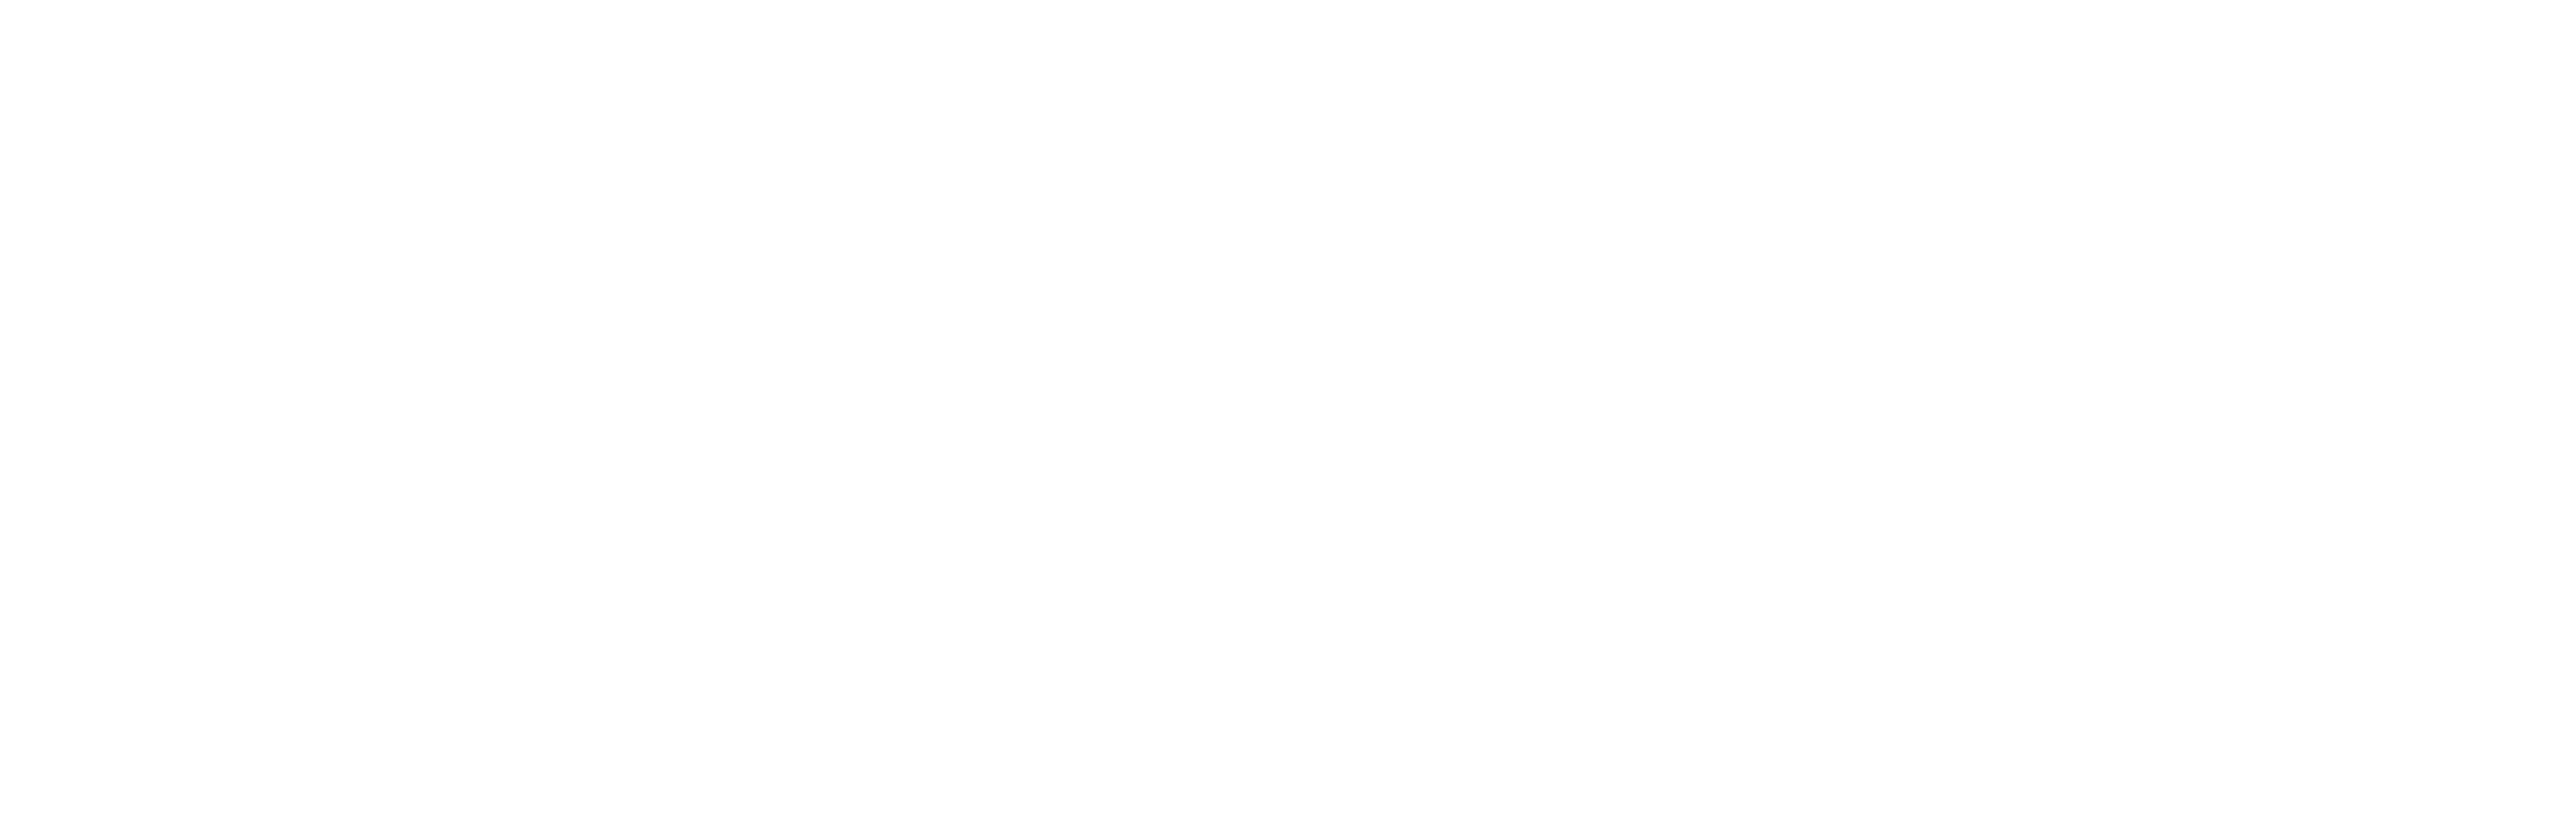 Gonzaba Medical Group - 60 Year Anniversary